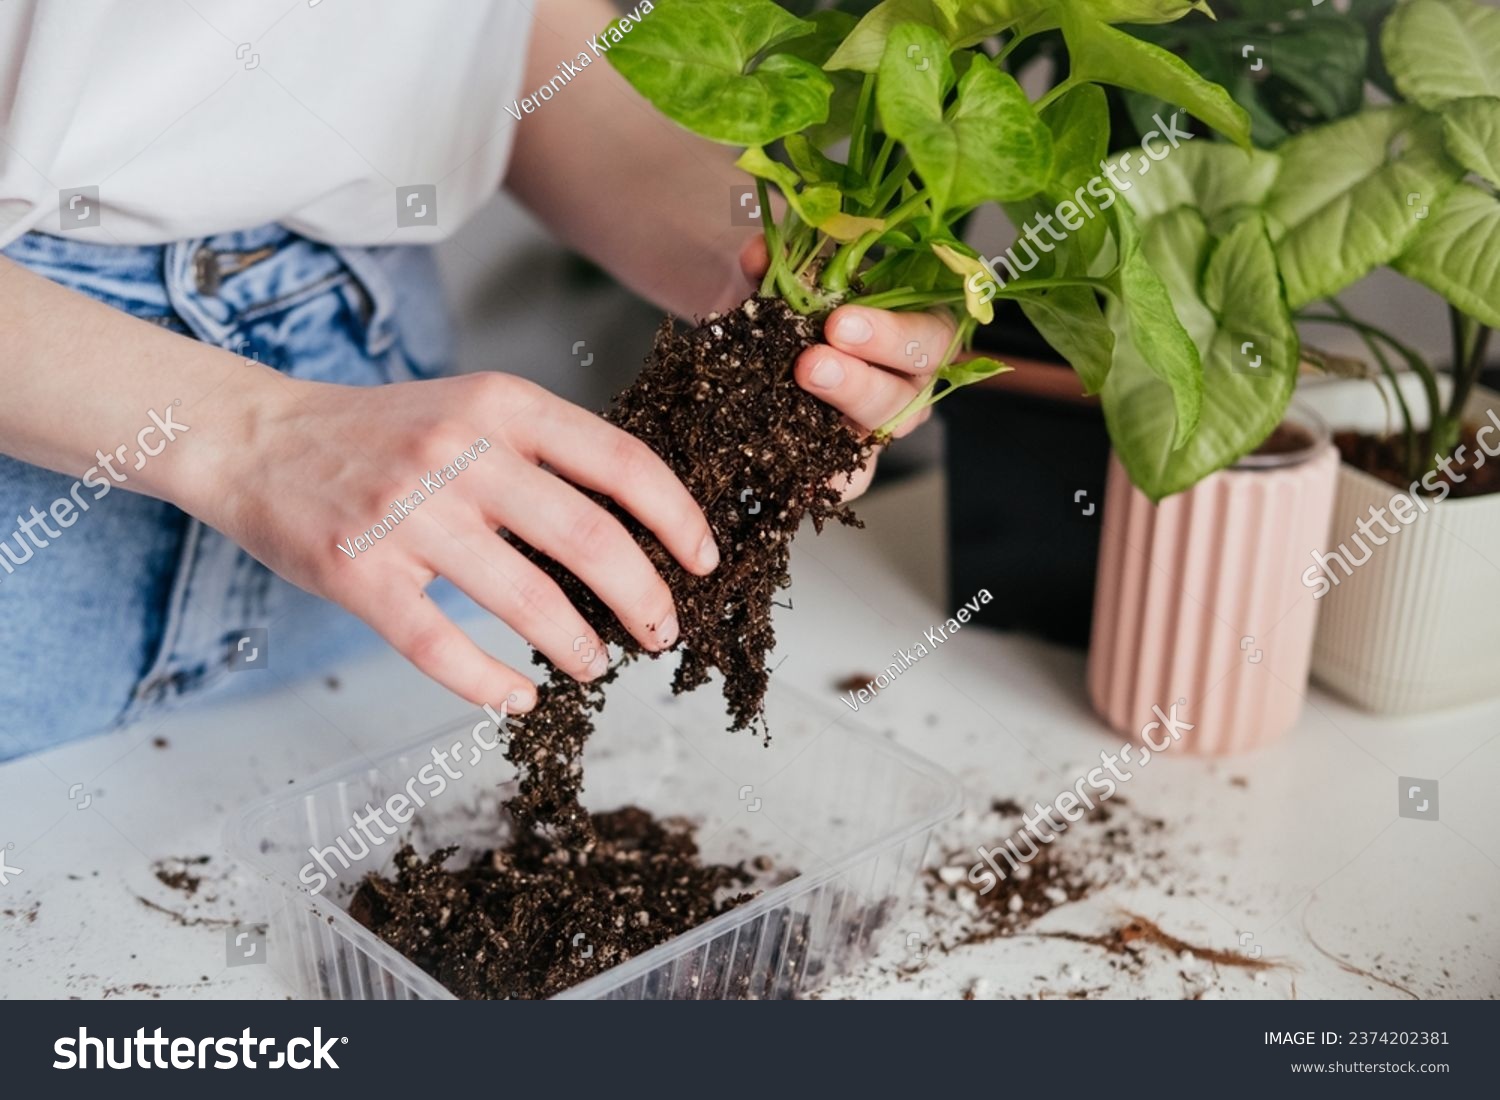 Female hands repotting green syngonium houseplant. Woman inspecting soil around roots. Root rot, yellowing leaves. Spring summer plant repotting and care #2374202381